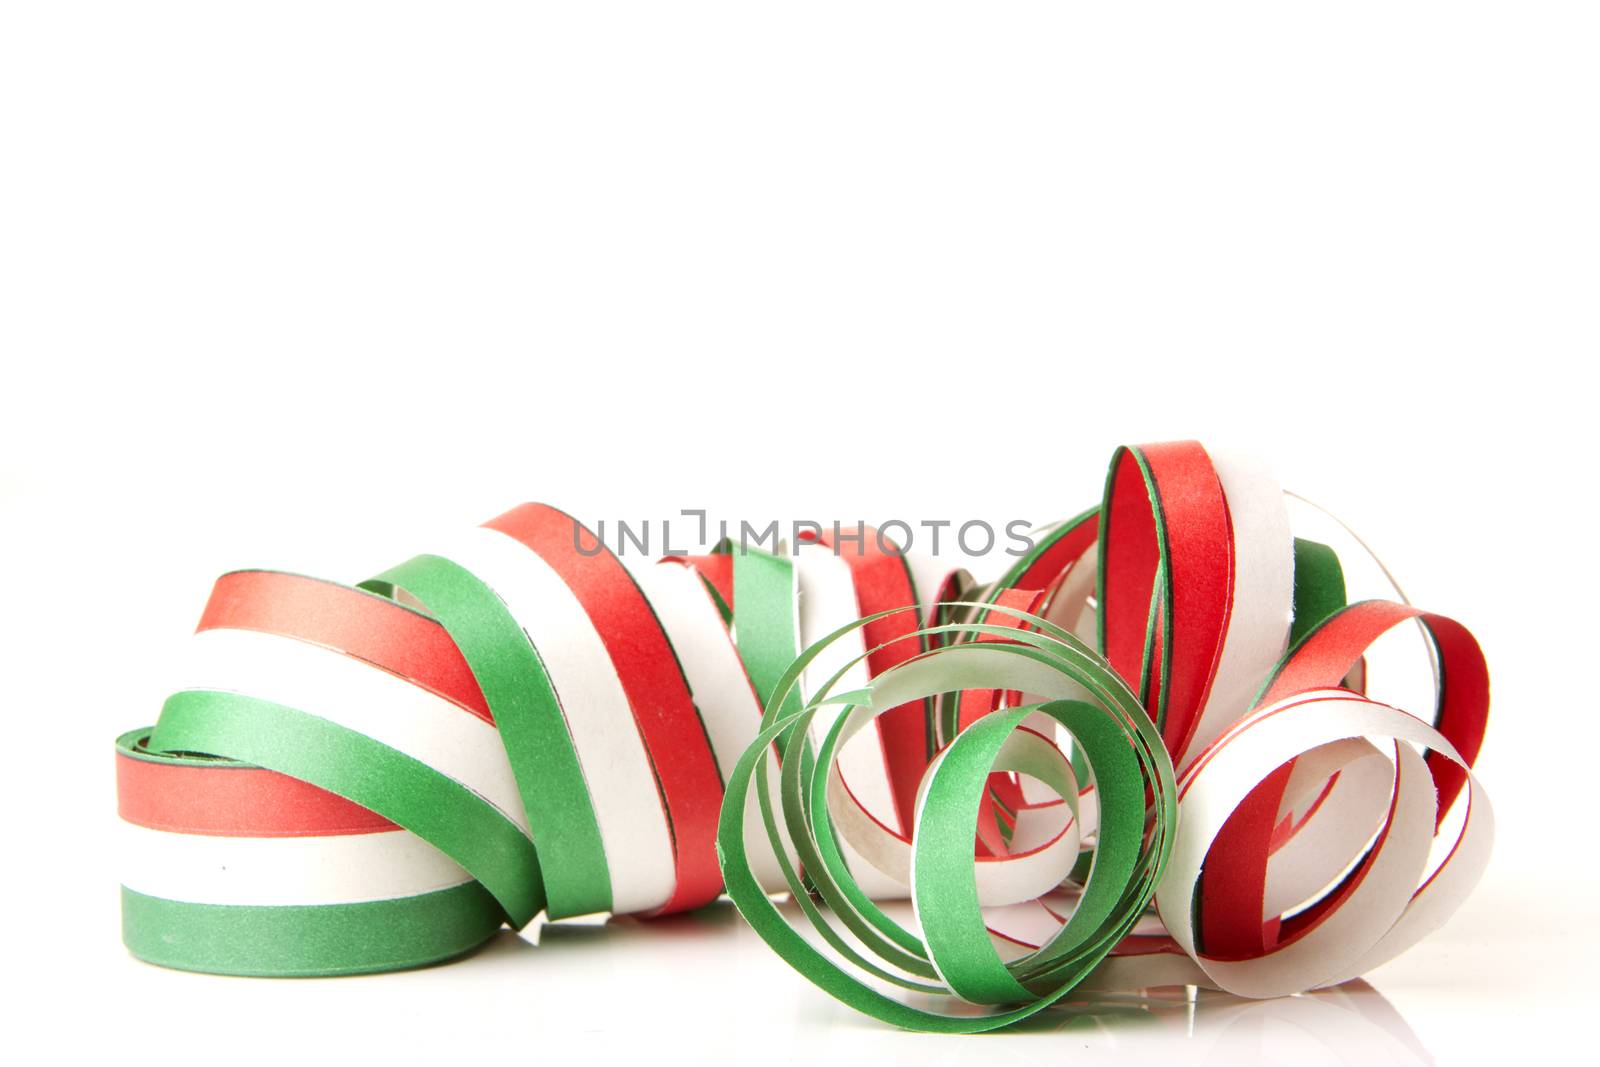 streamers and confetti as decoration for parties, sylvester with white background 